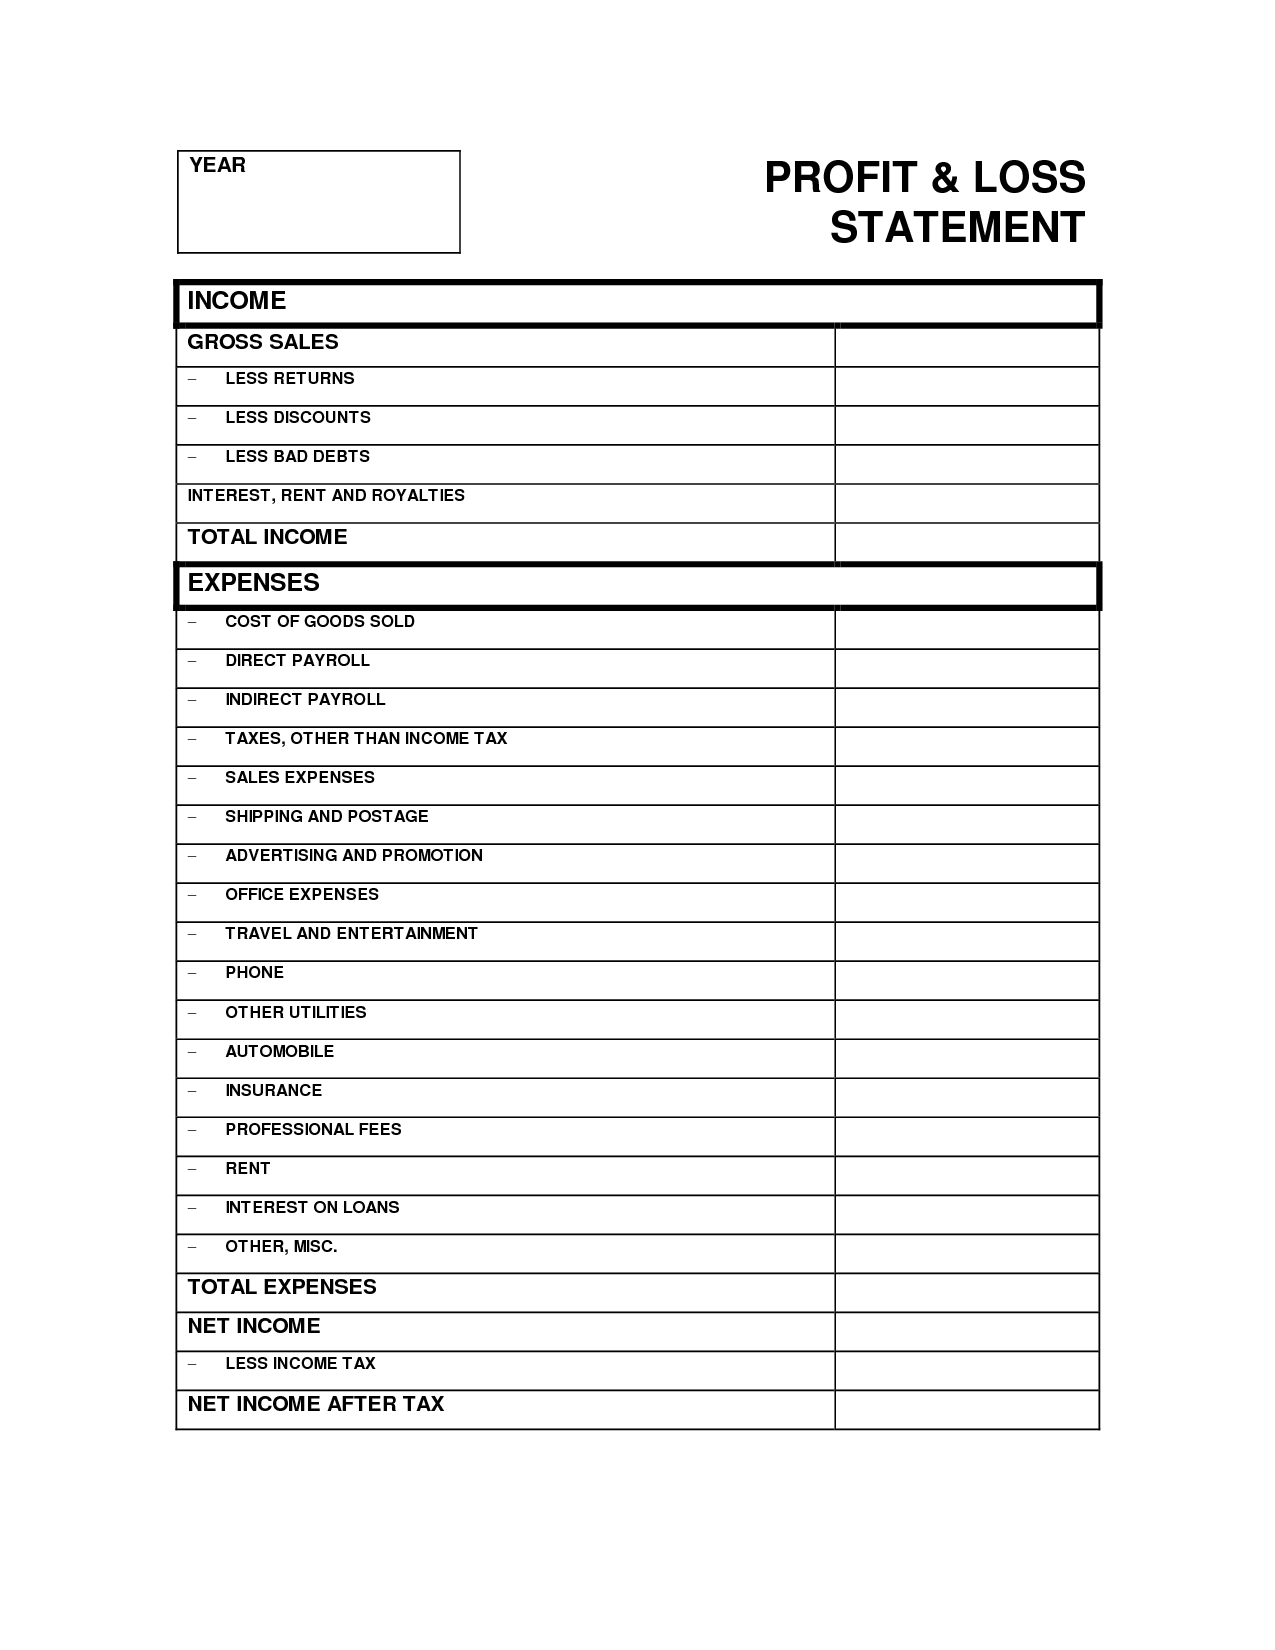 profit-and-loss-statement-template-profit-loss-spreadsheet-income